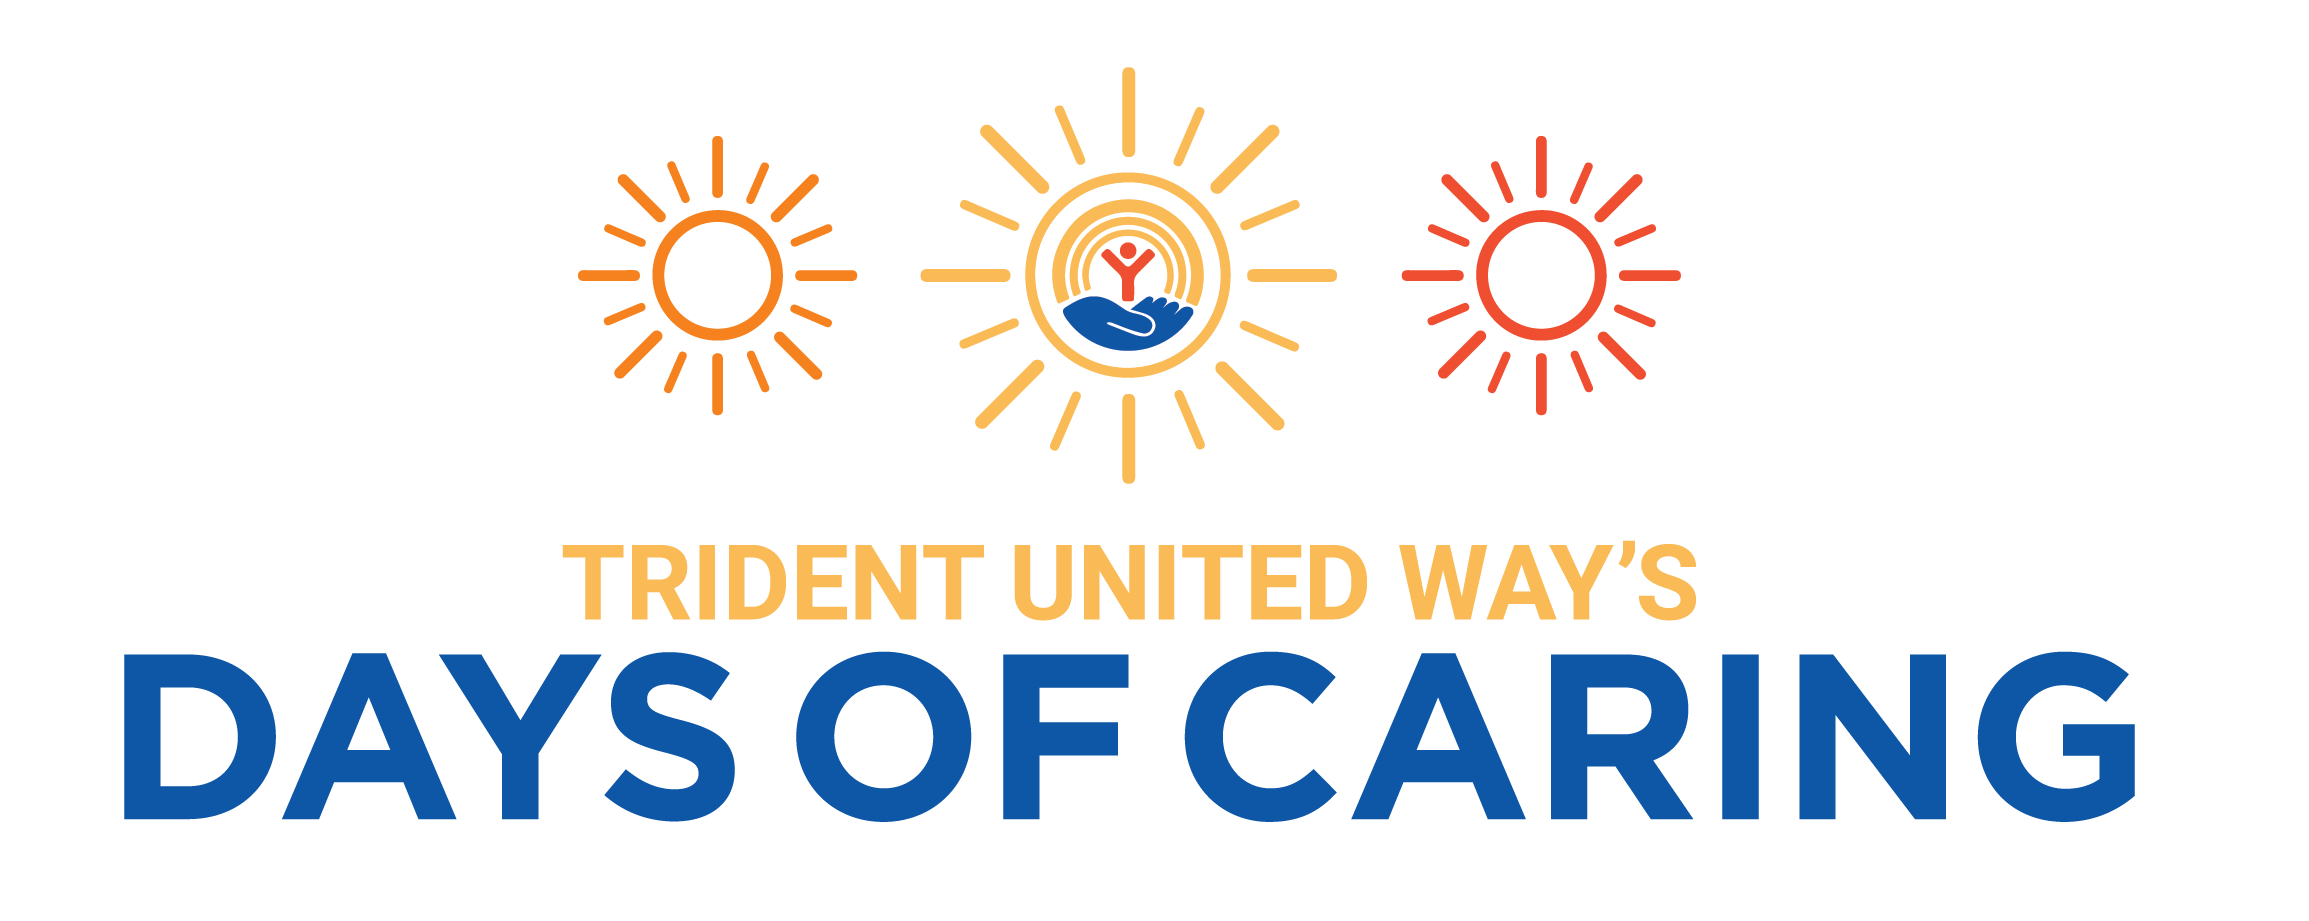 Logo with text "Trident United Way's Day of Caring", underneath three outlines of a sun in orange, yellow, and red. The middle sun contains the logo of Trident United Way.